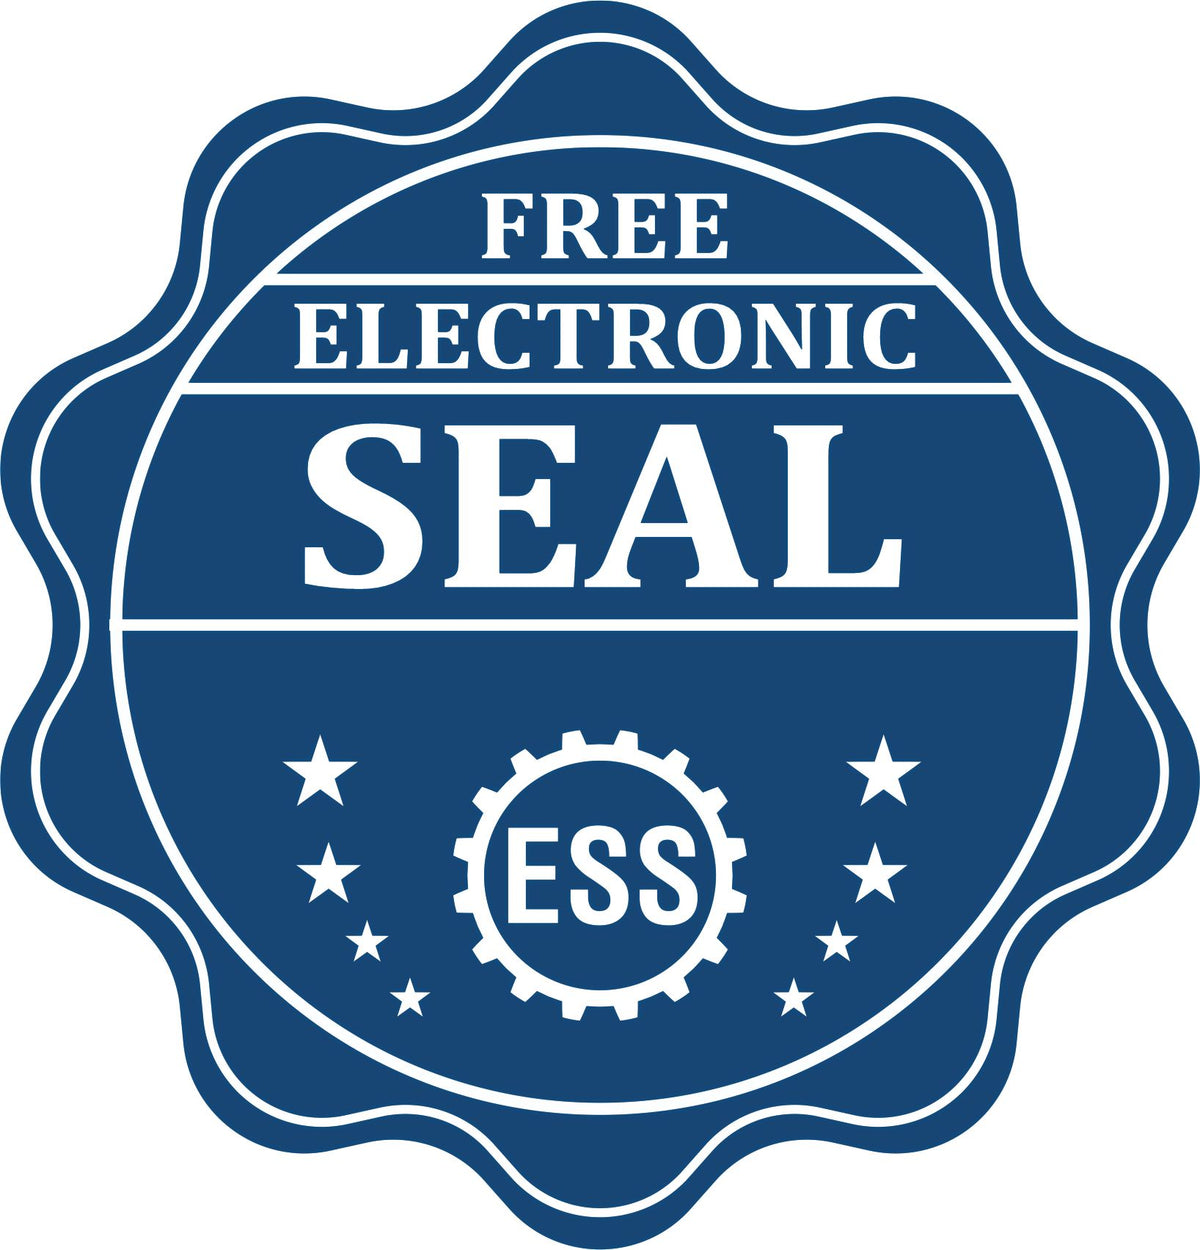 A badge showing a free electronic seal for the Soft Delaware Professional Engineer Seal with stars and the ESS gear on the emblem.